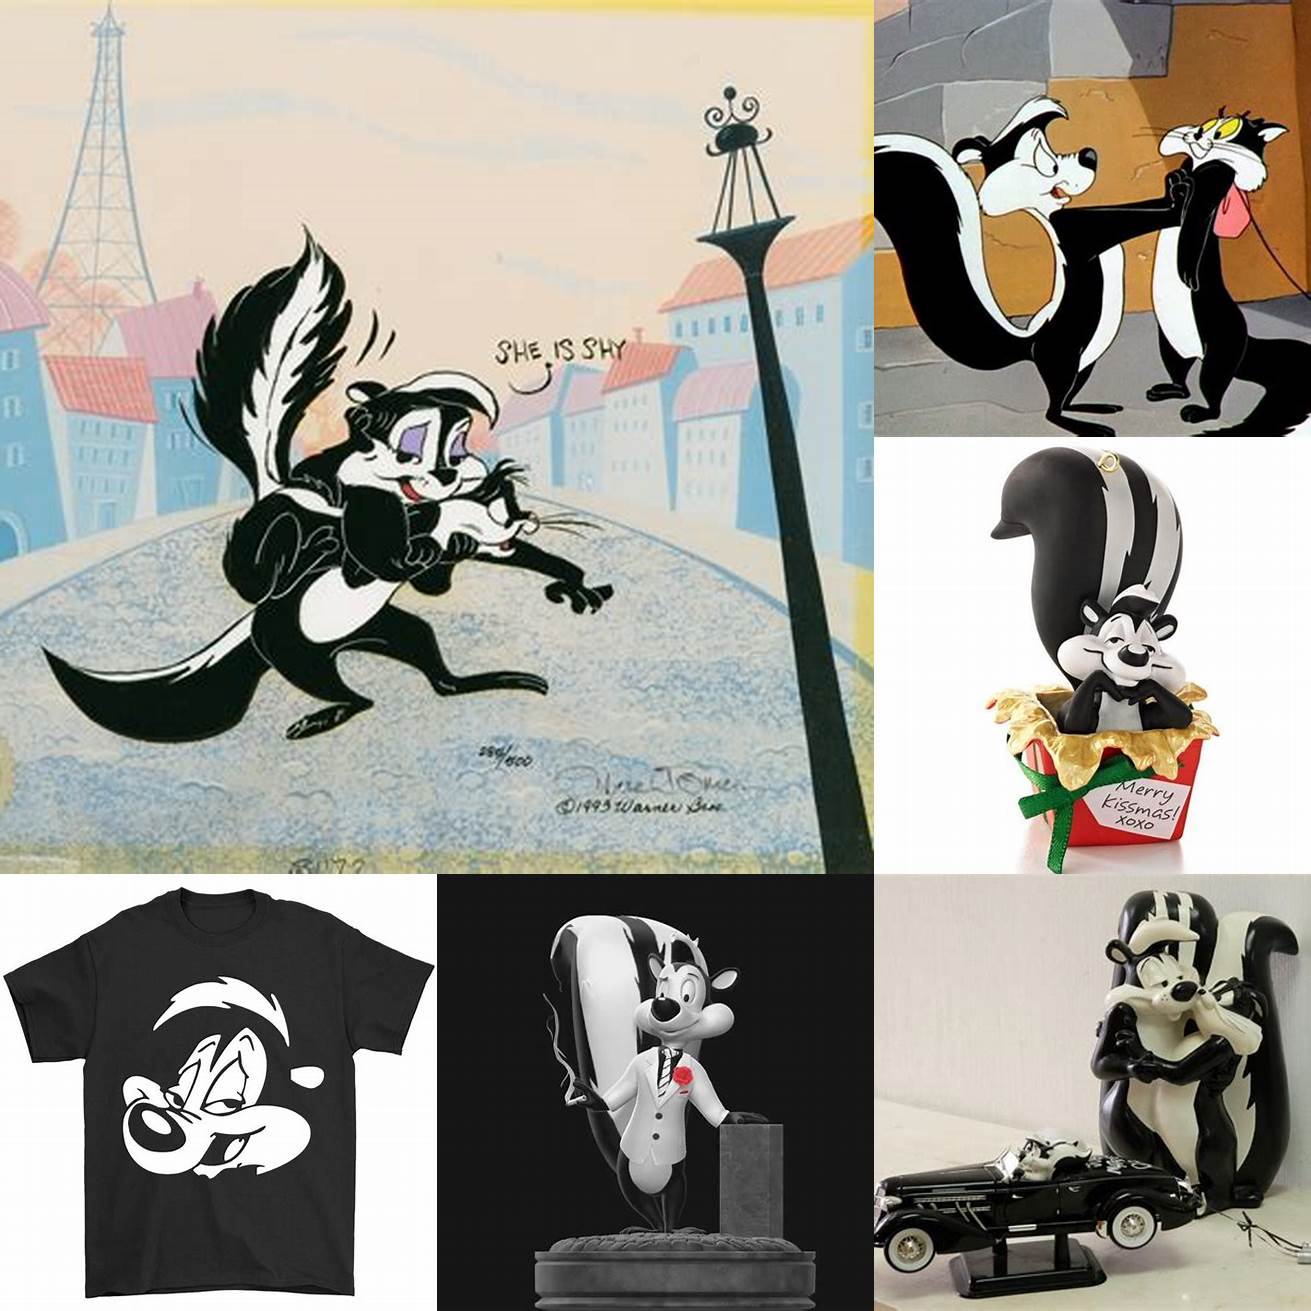 The cat from Pepe Le Pew has inspired merchandise and spin-off media